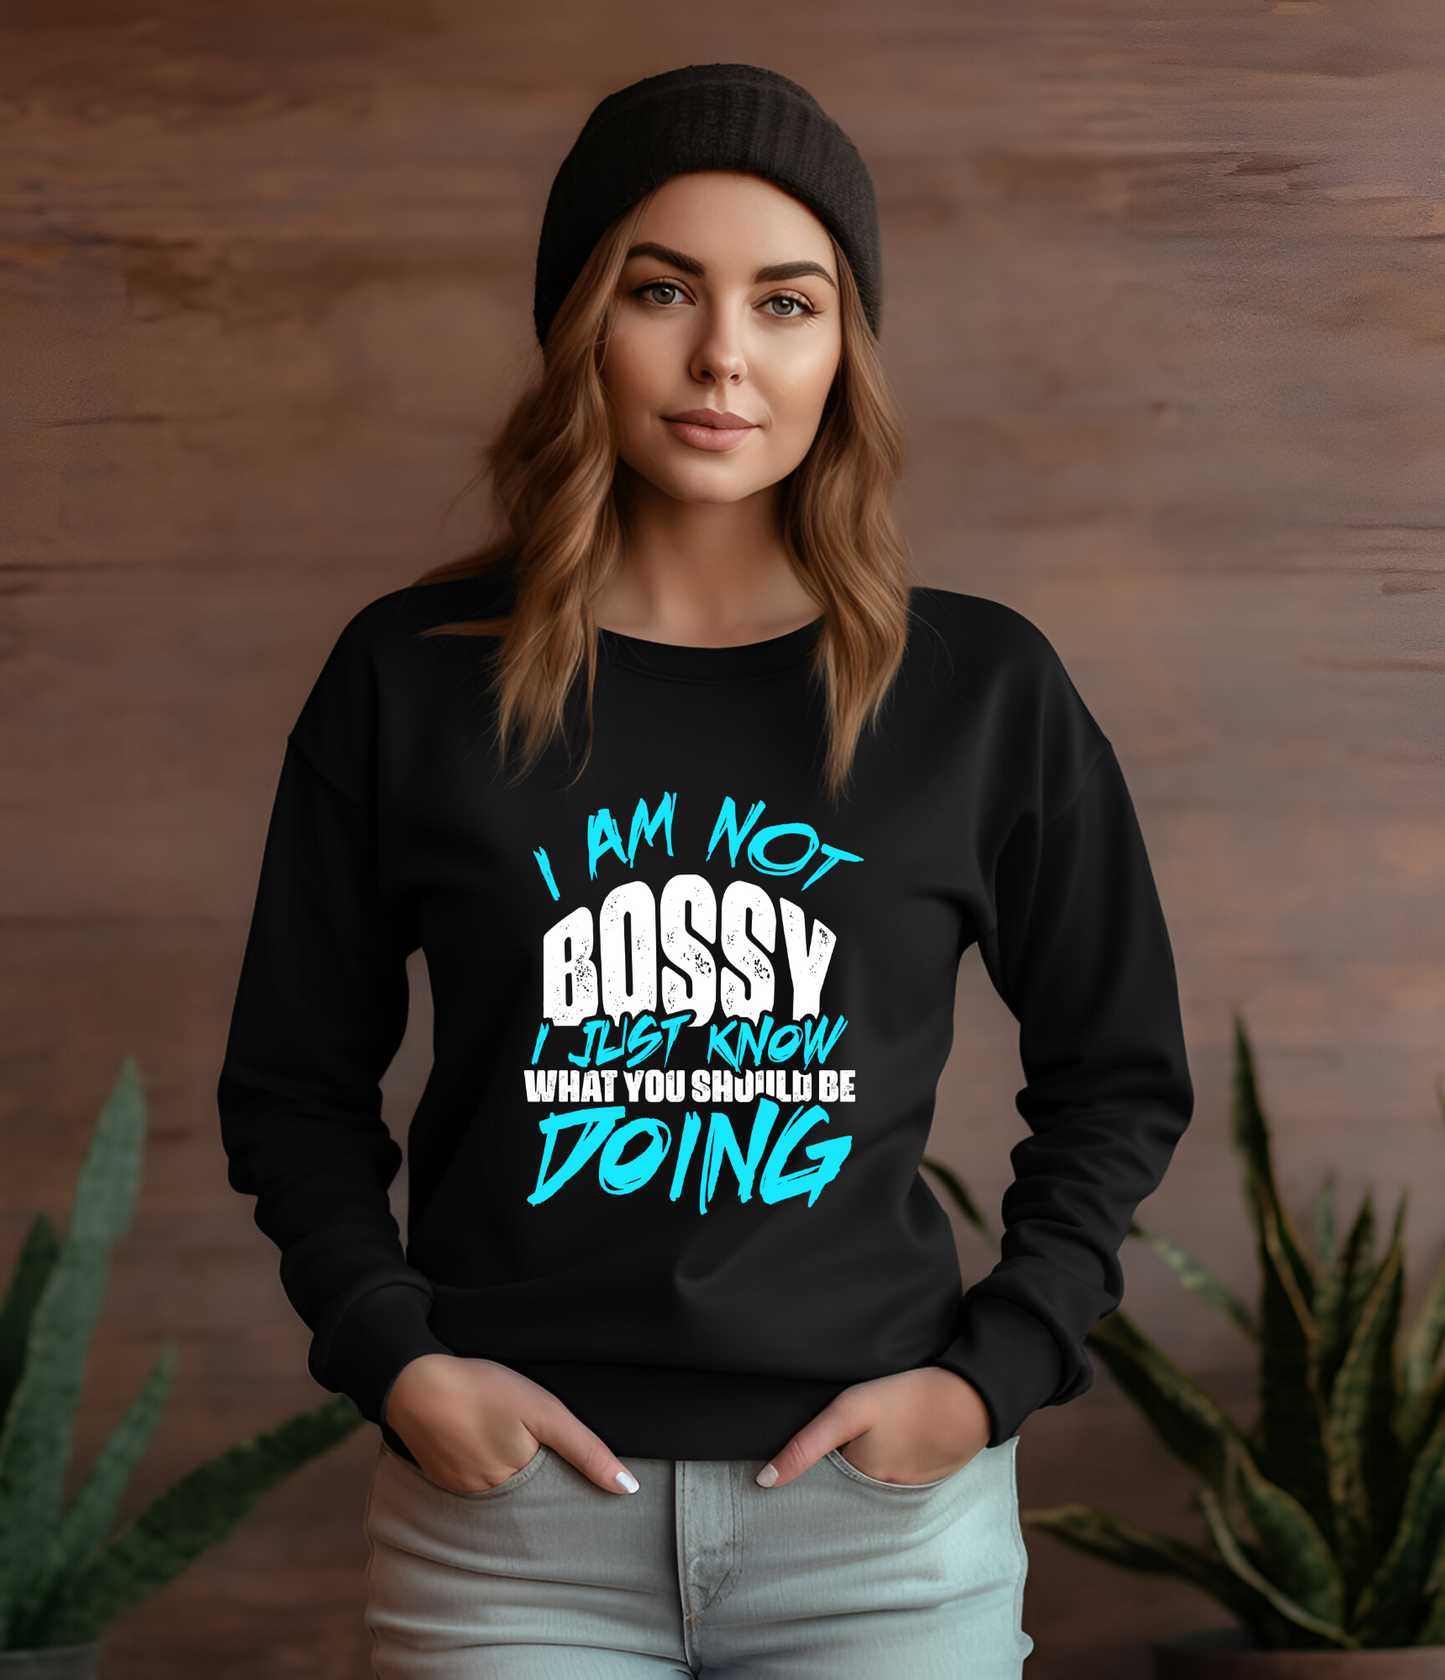 LONG SLEEVE SHIRT - I AM NOT BOSSY I JUST KNOW WHAT YOU SHOULD BE DOING